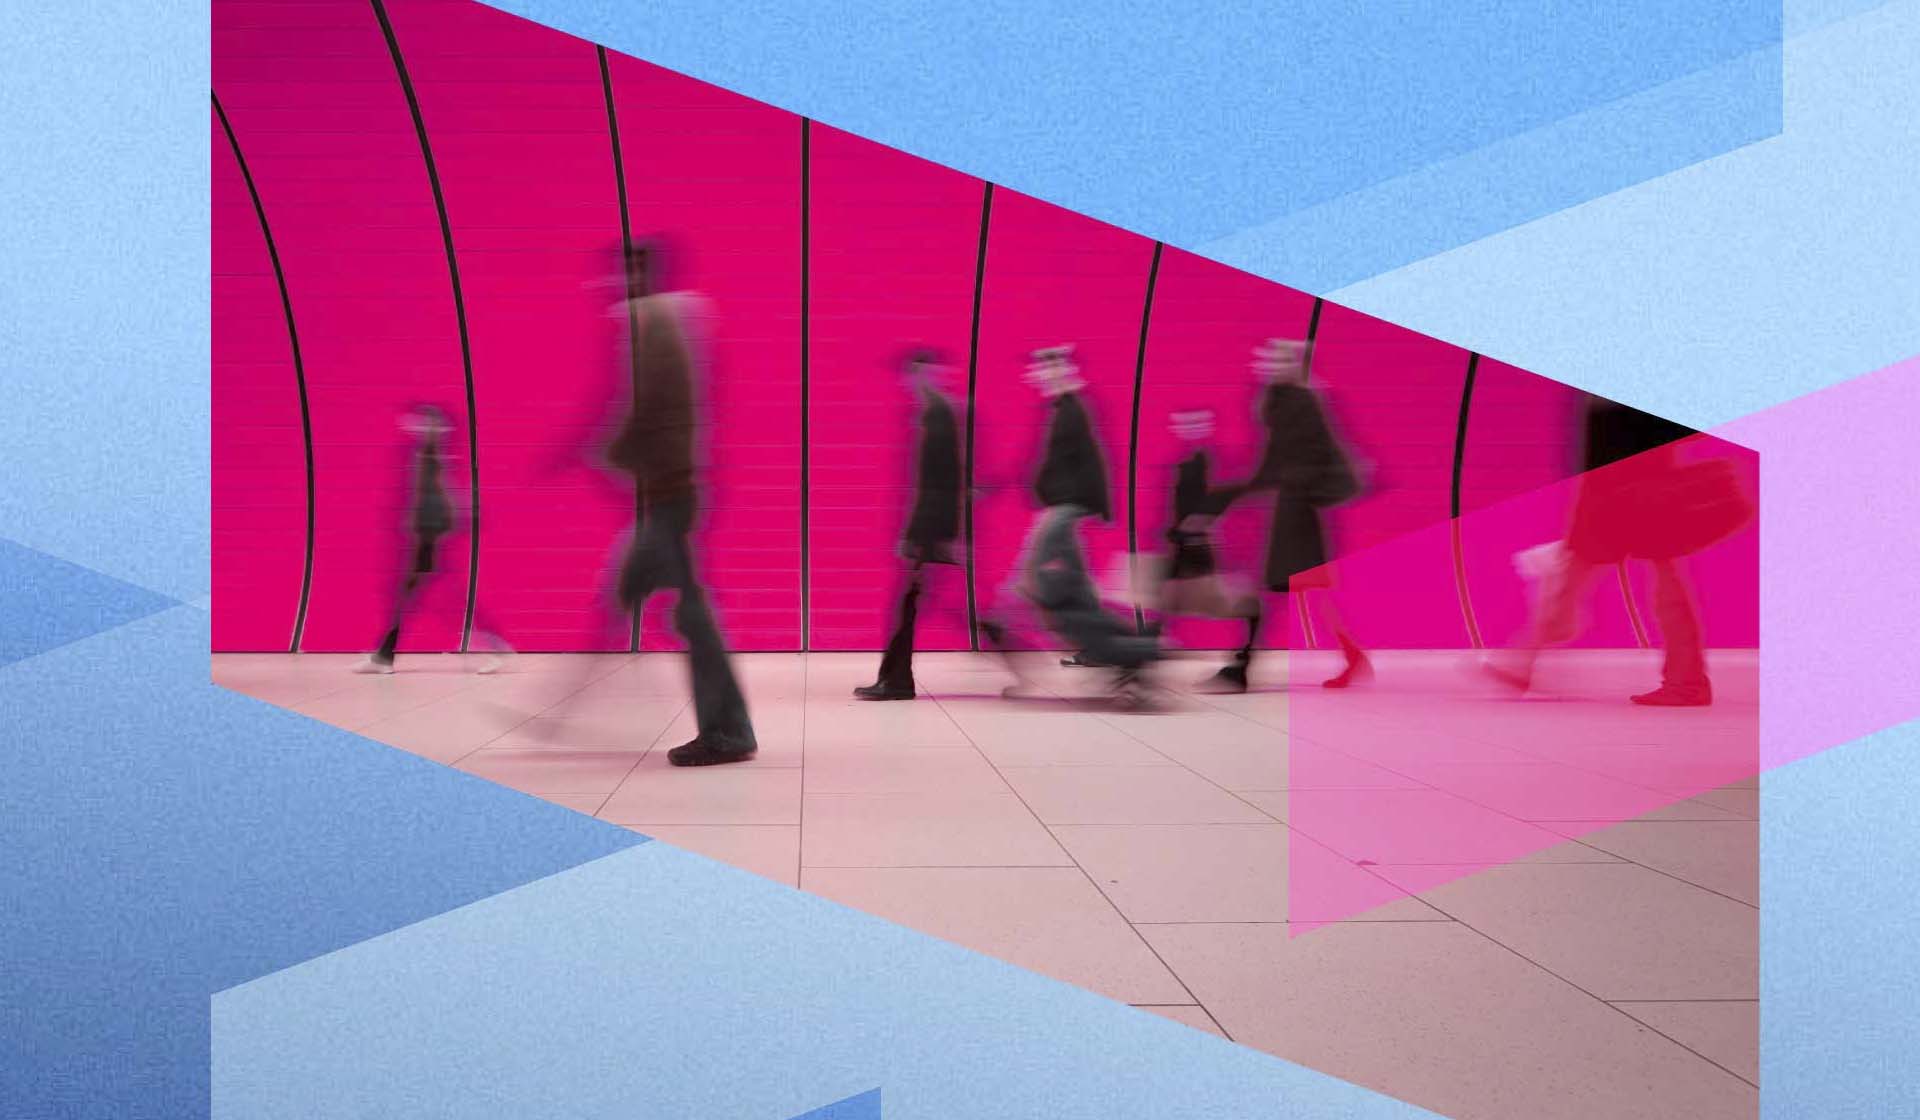 A long exposure shot of people walking through a pink tunnel